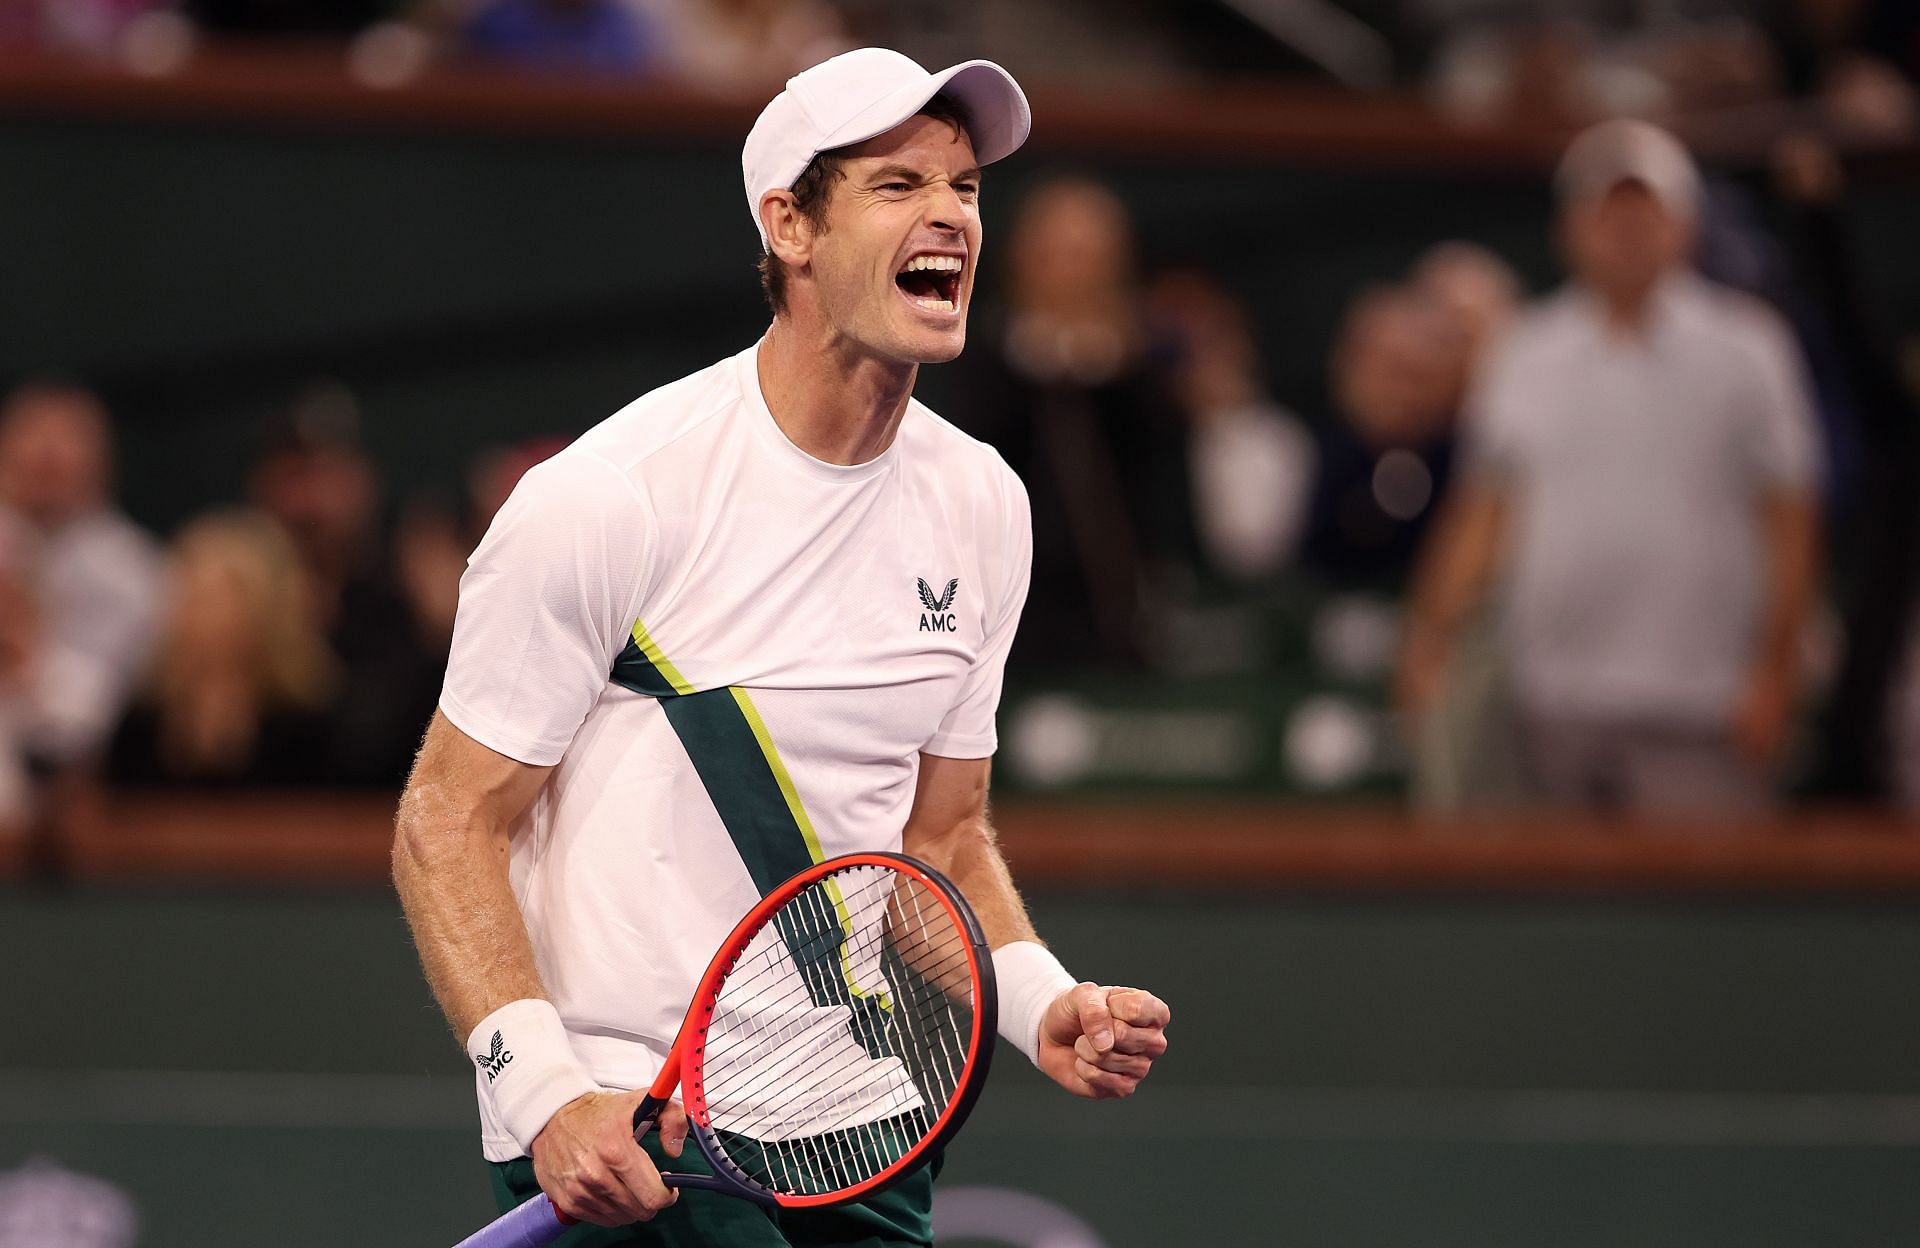 Andy Murray exults after his first-round win at the BNP Paribas Open. (PC: Getty Images)